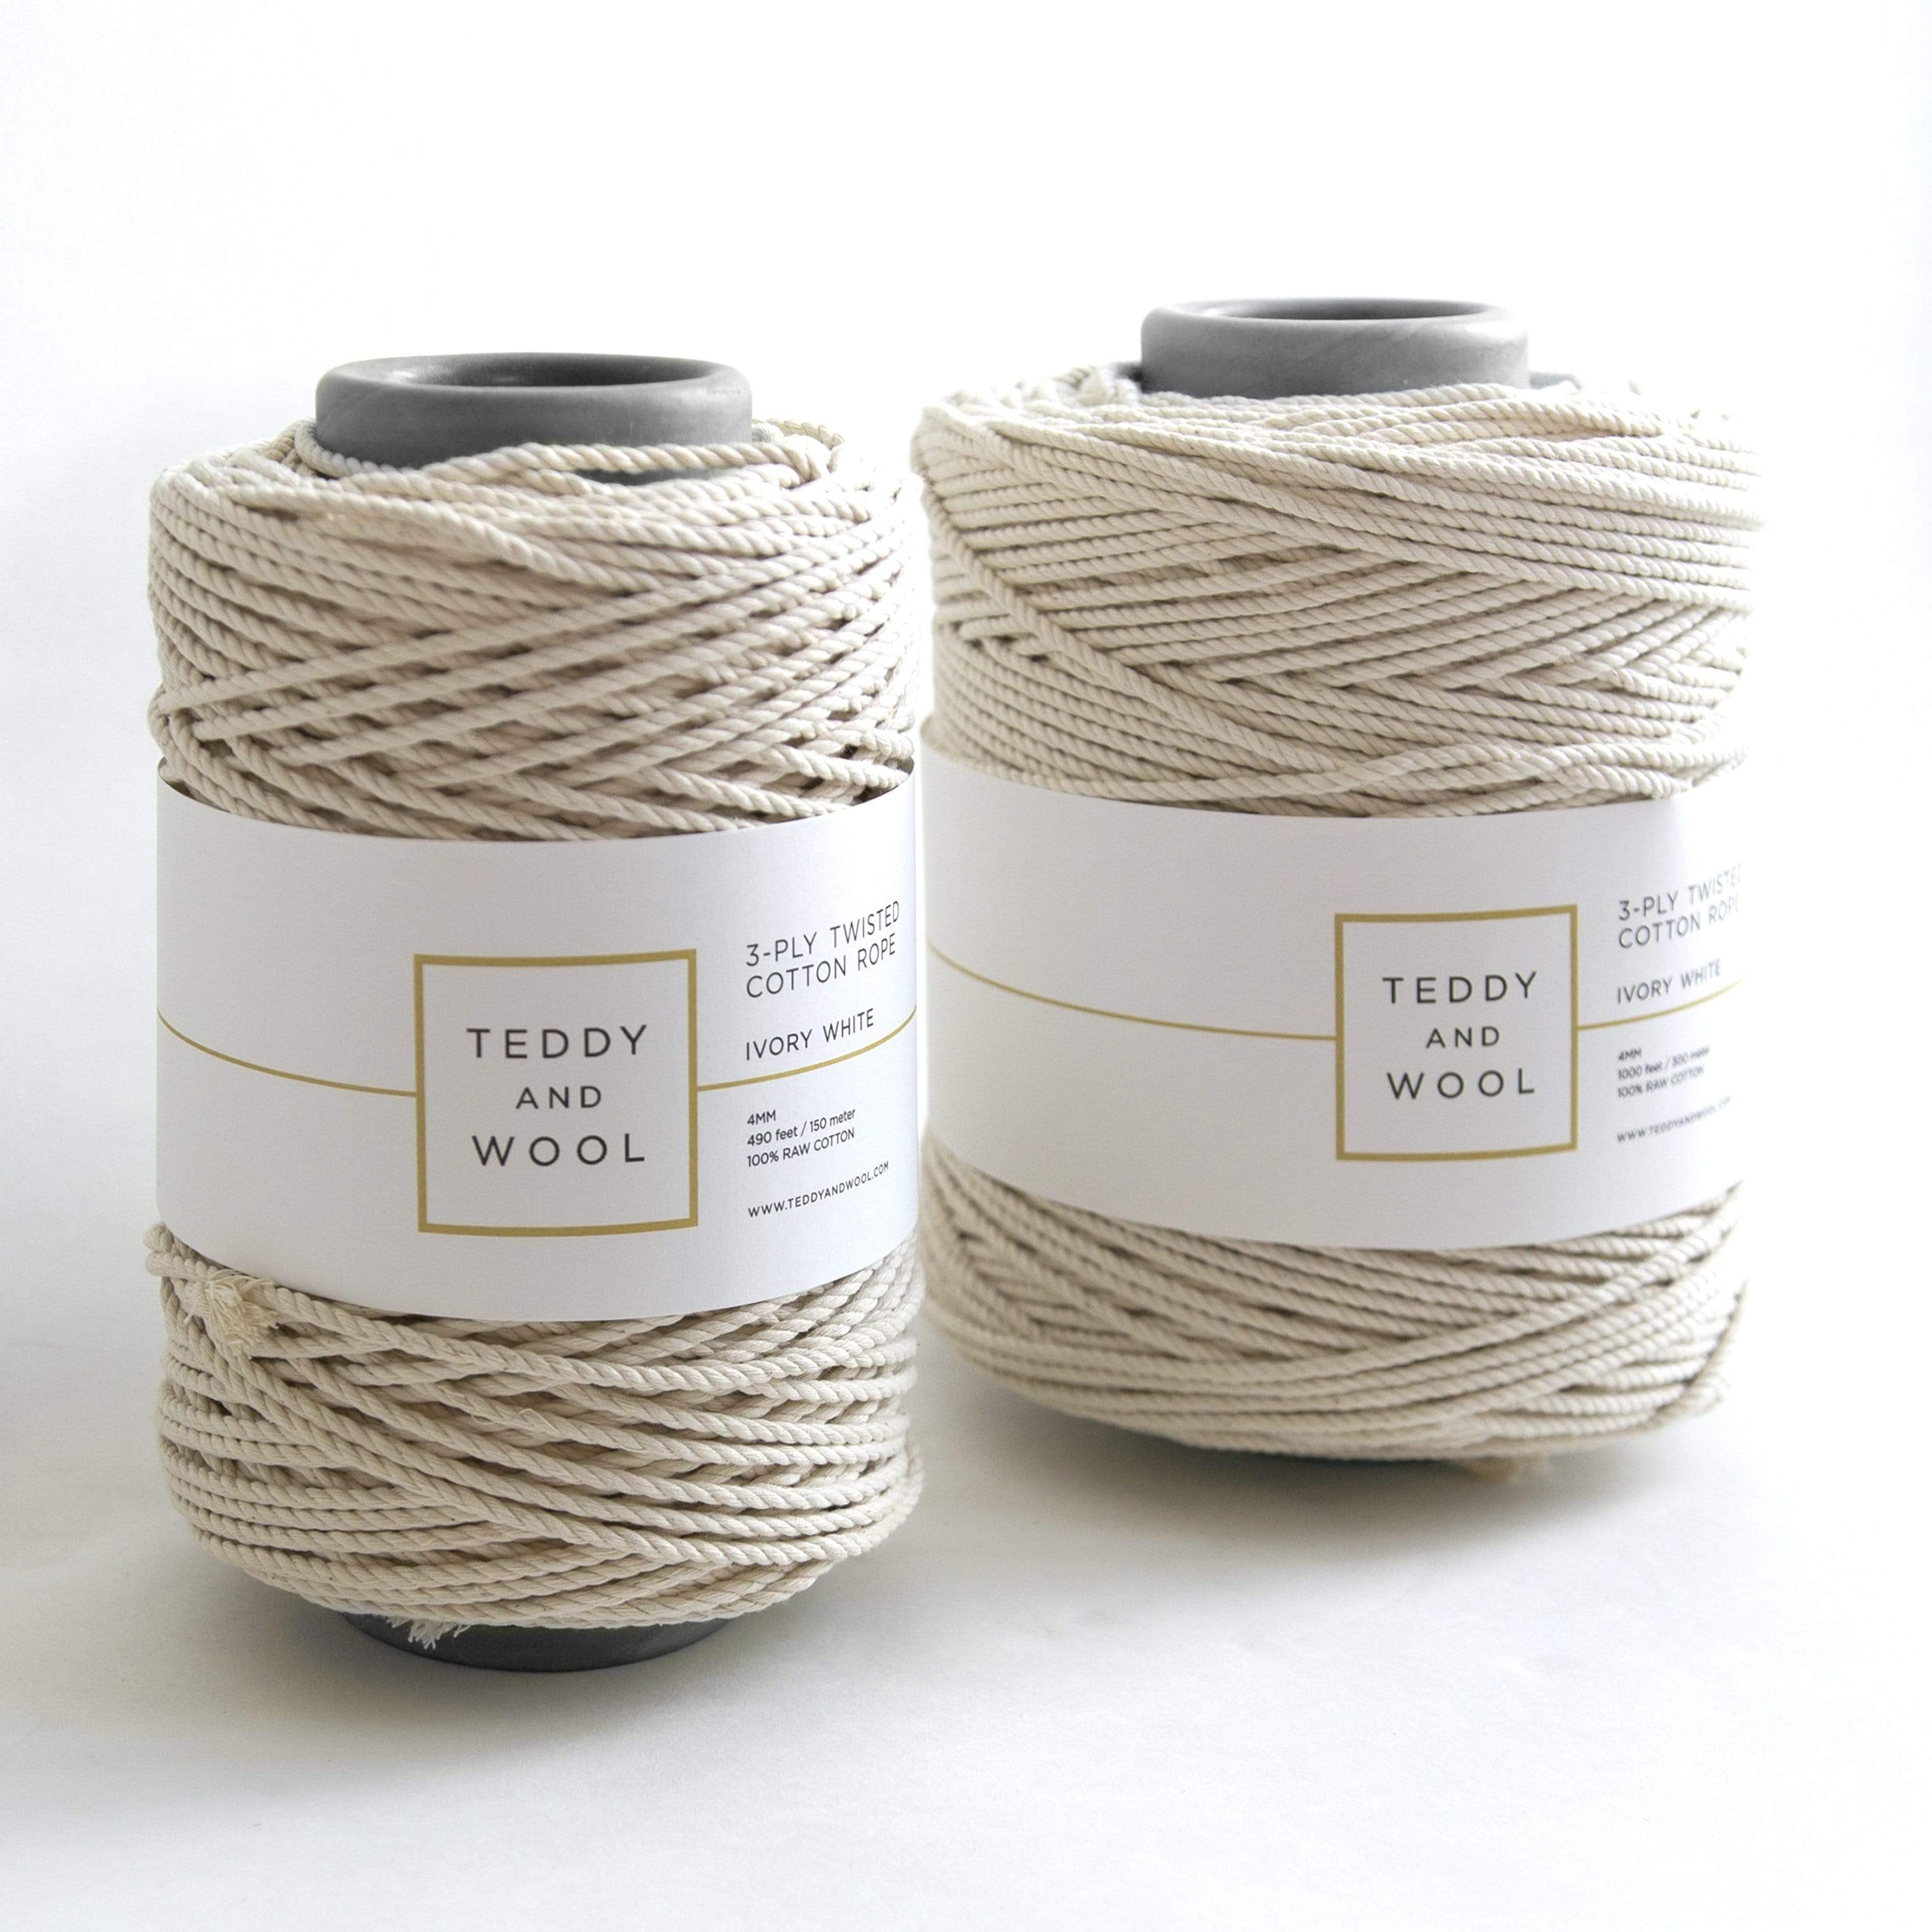 Cotton Cord 4mm rope 3 stand (ply) twisted macrame cord 1kg cotton yarn